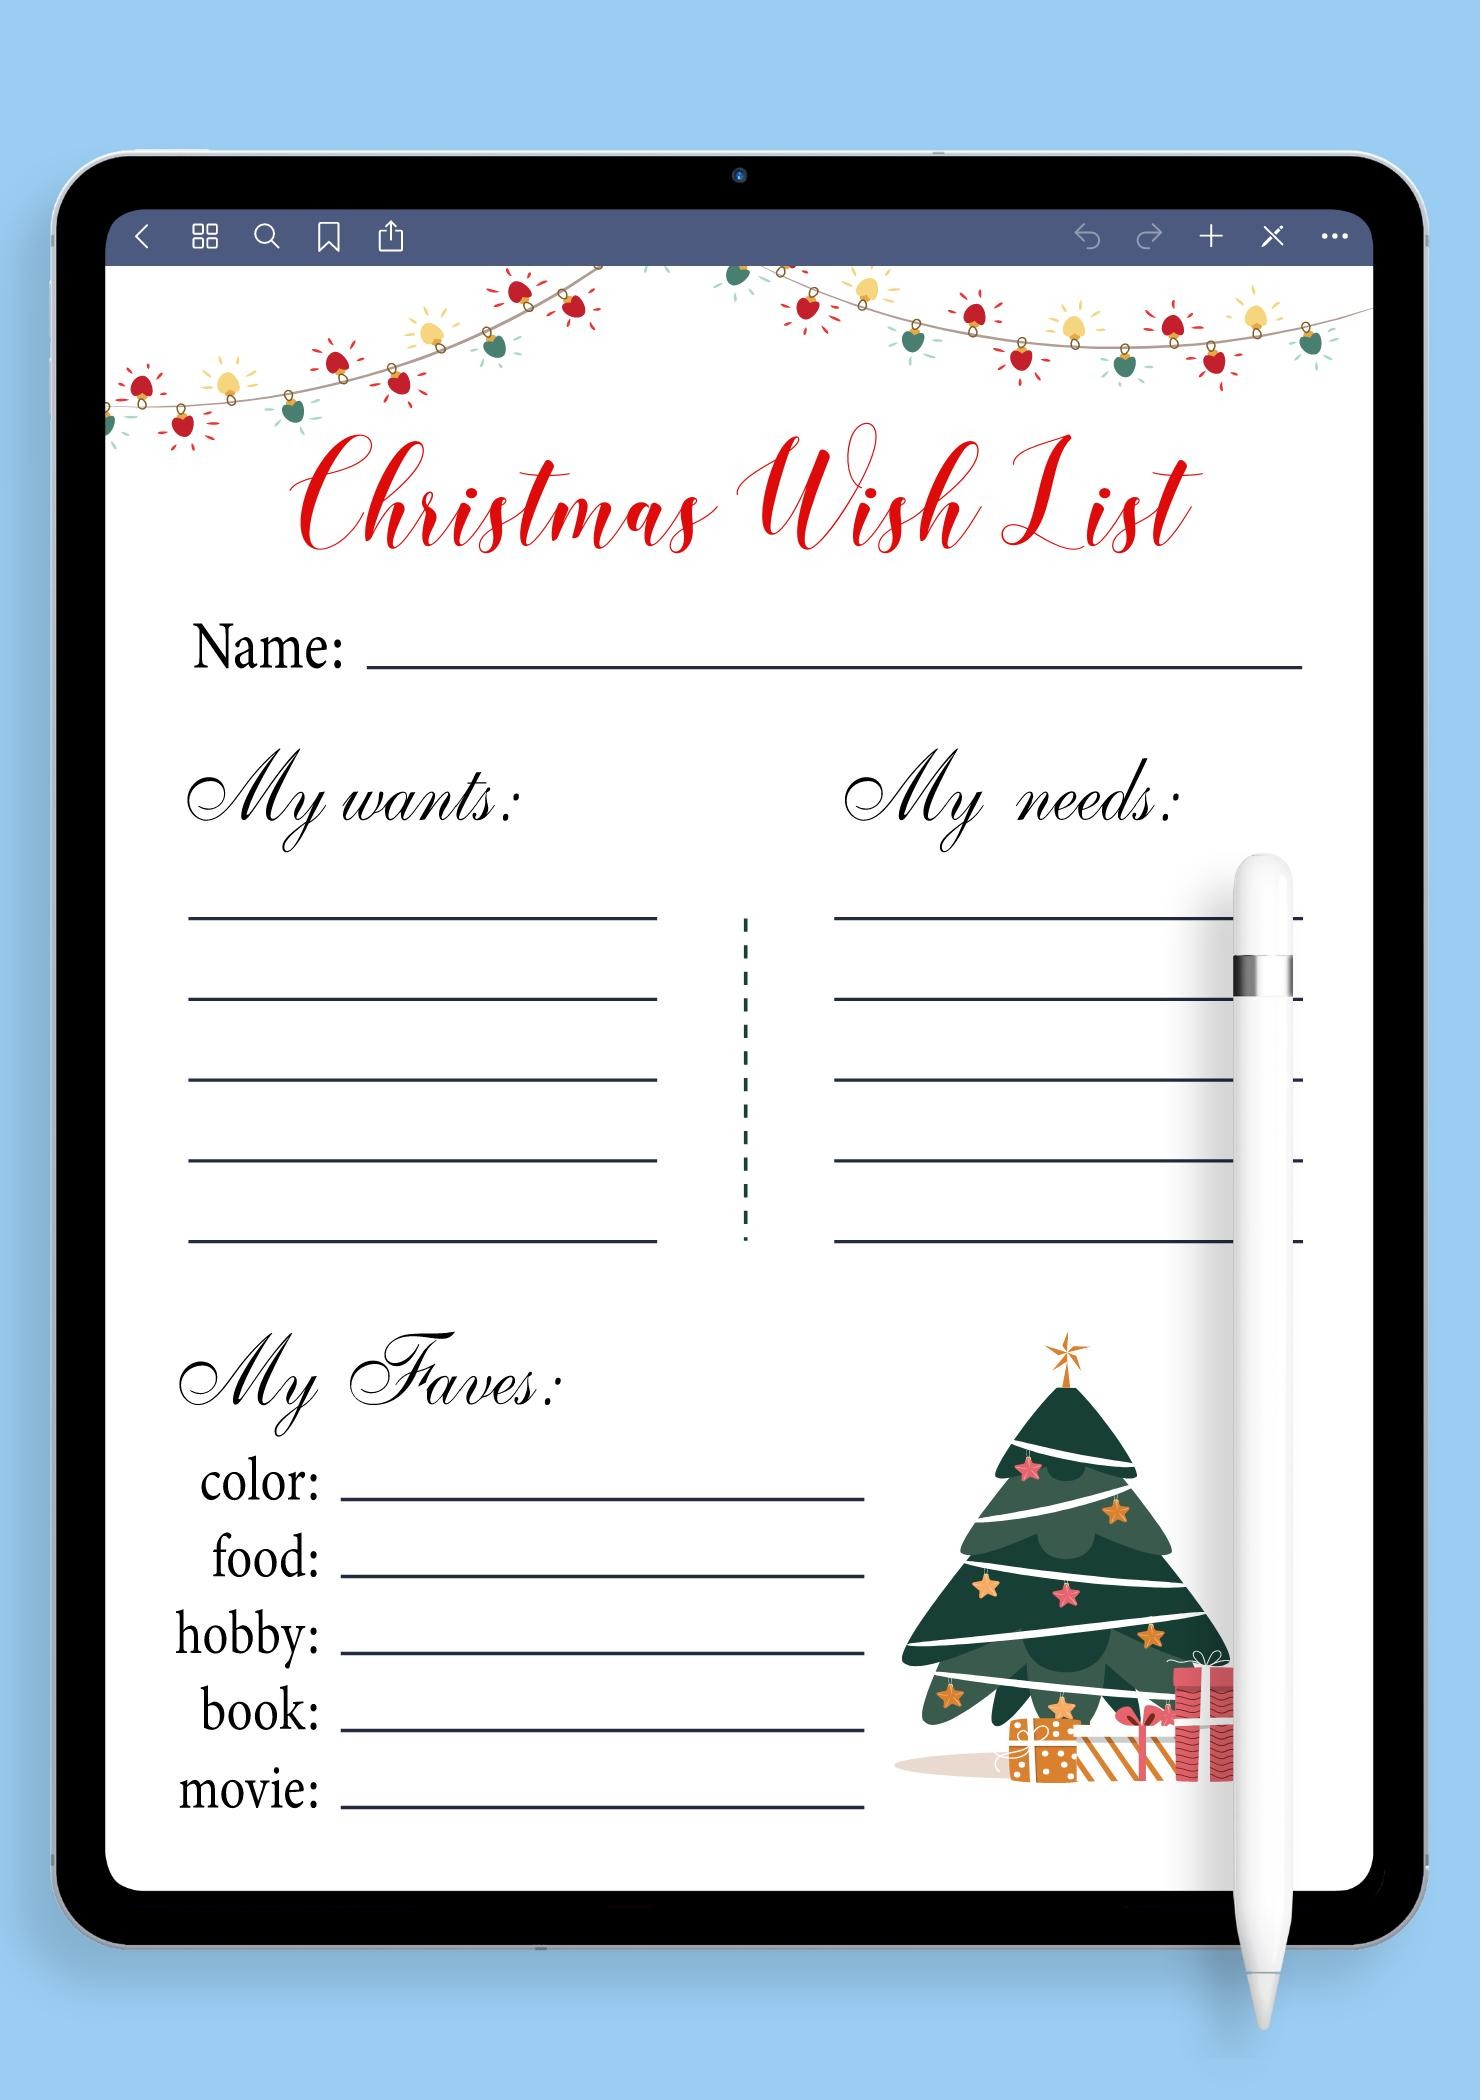 Free Printable Christmas Wish List Templates in PDF, PNG and JPG